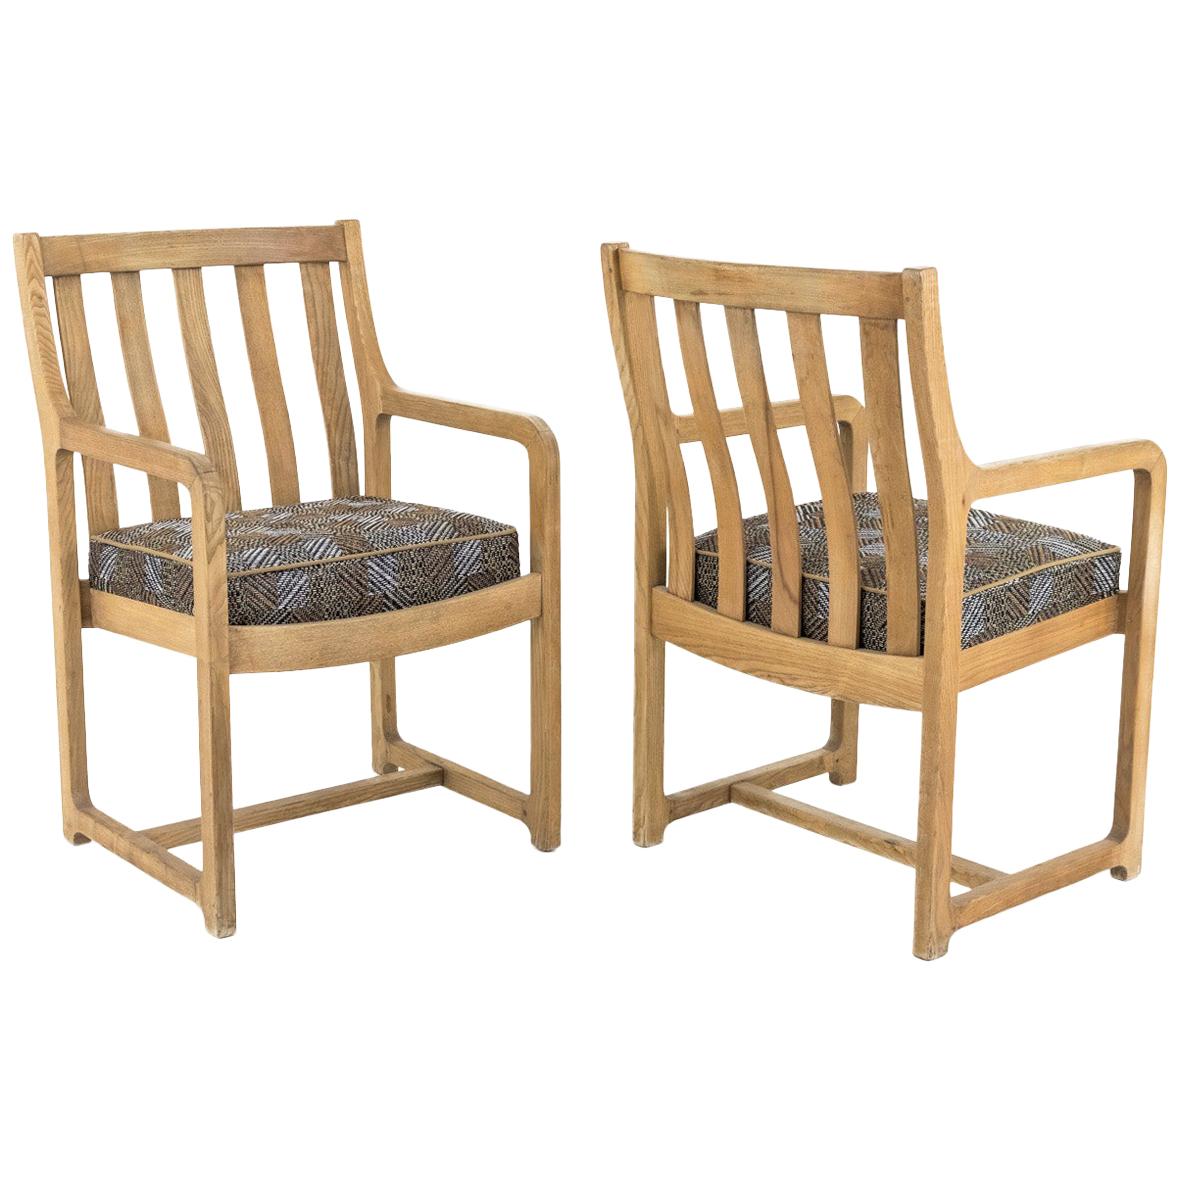 Pair of Natural Oakwood Armchairs, 1950s For Sale